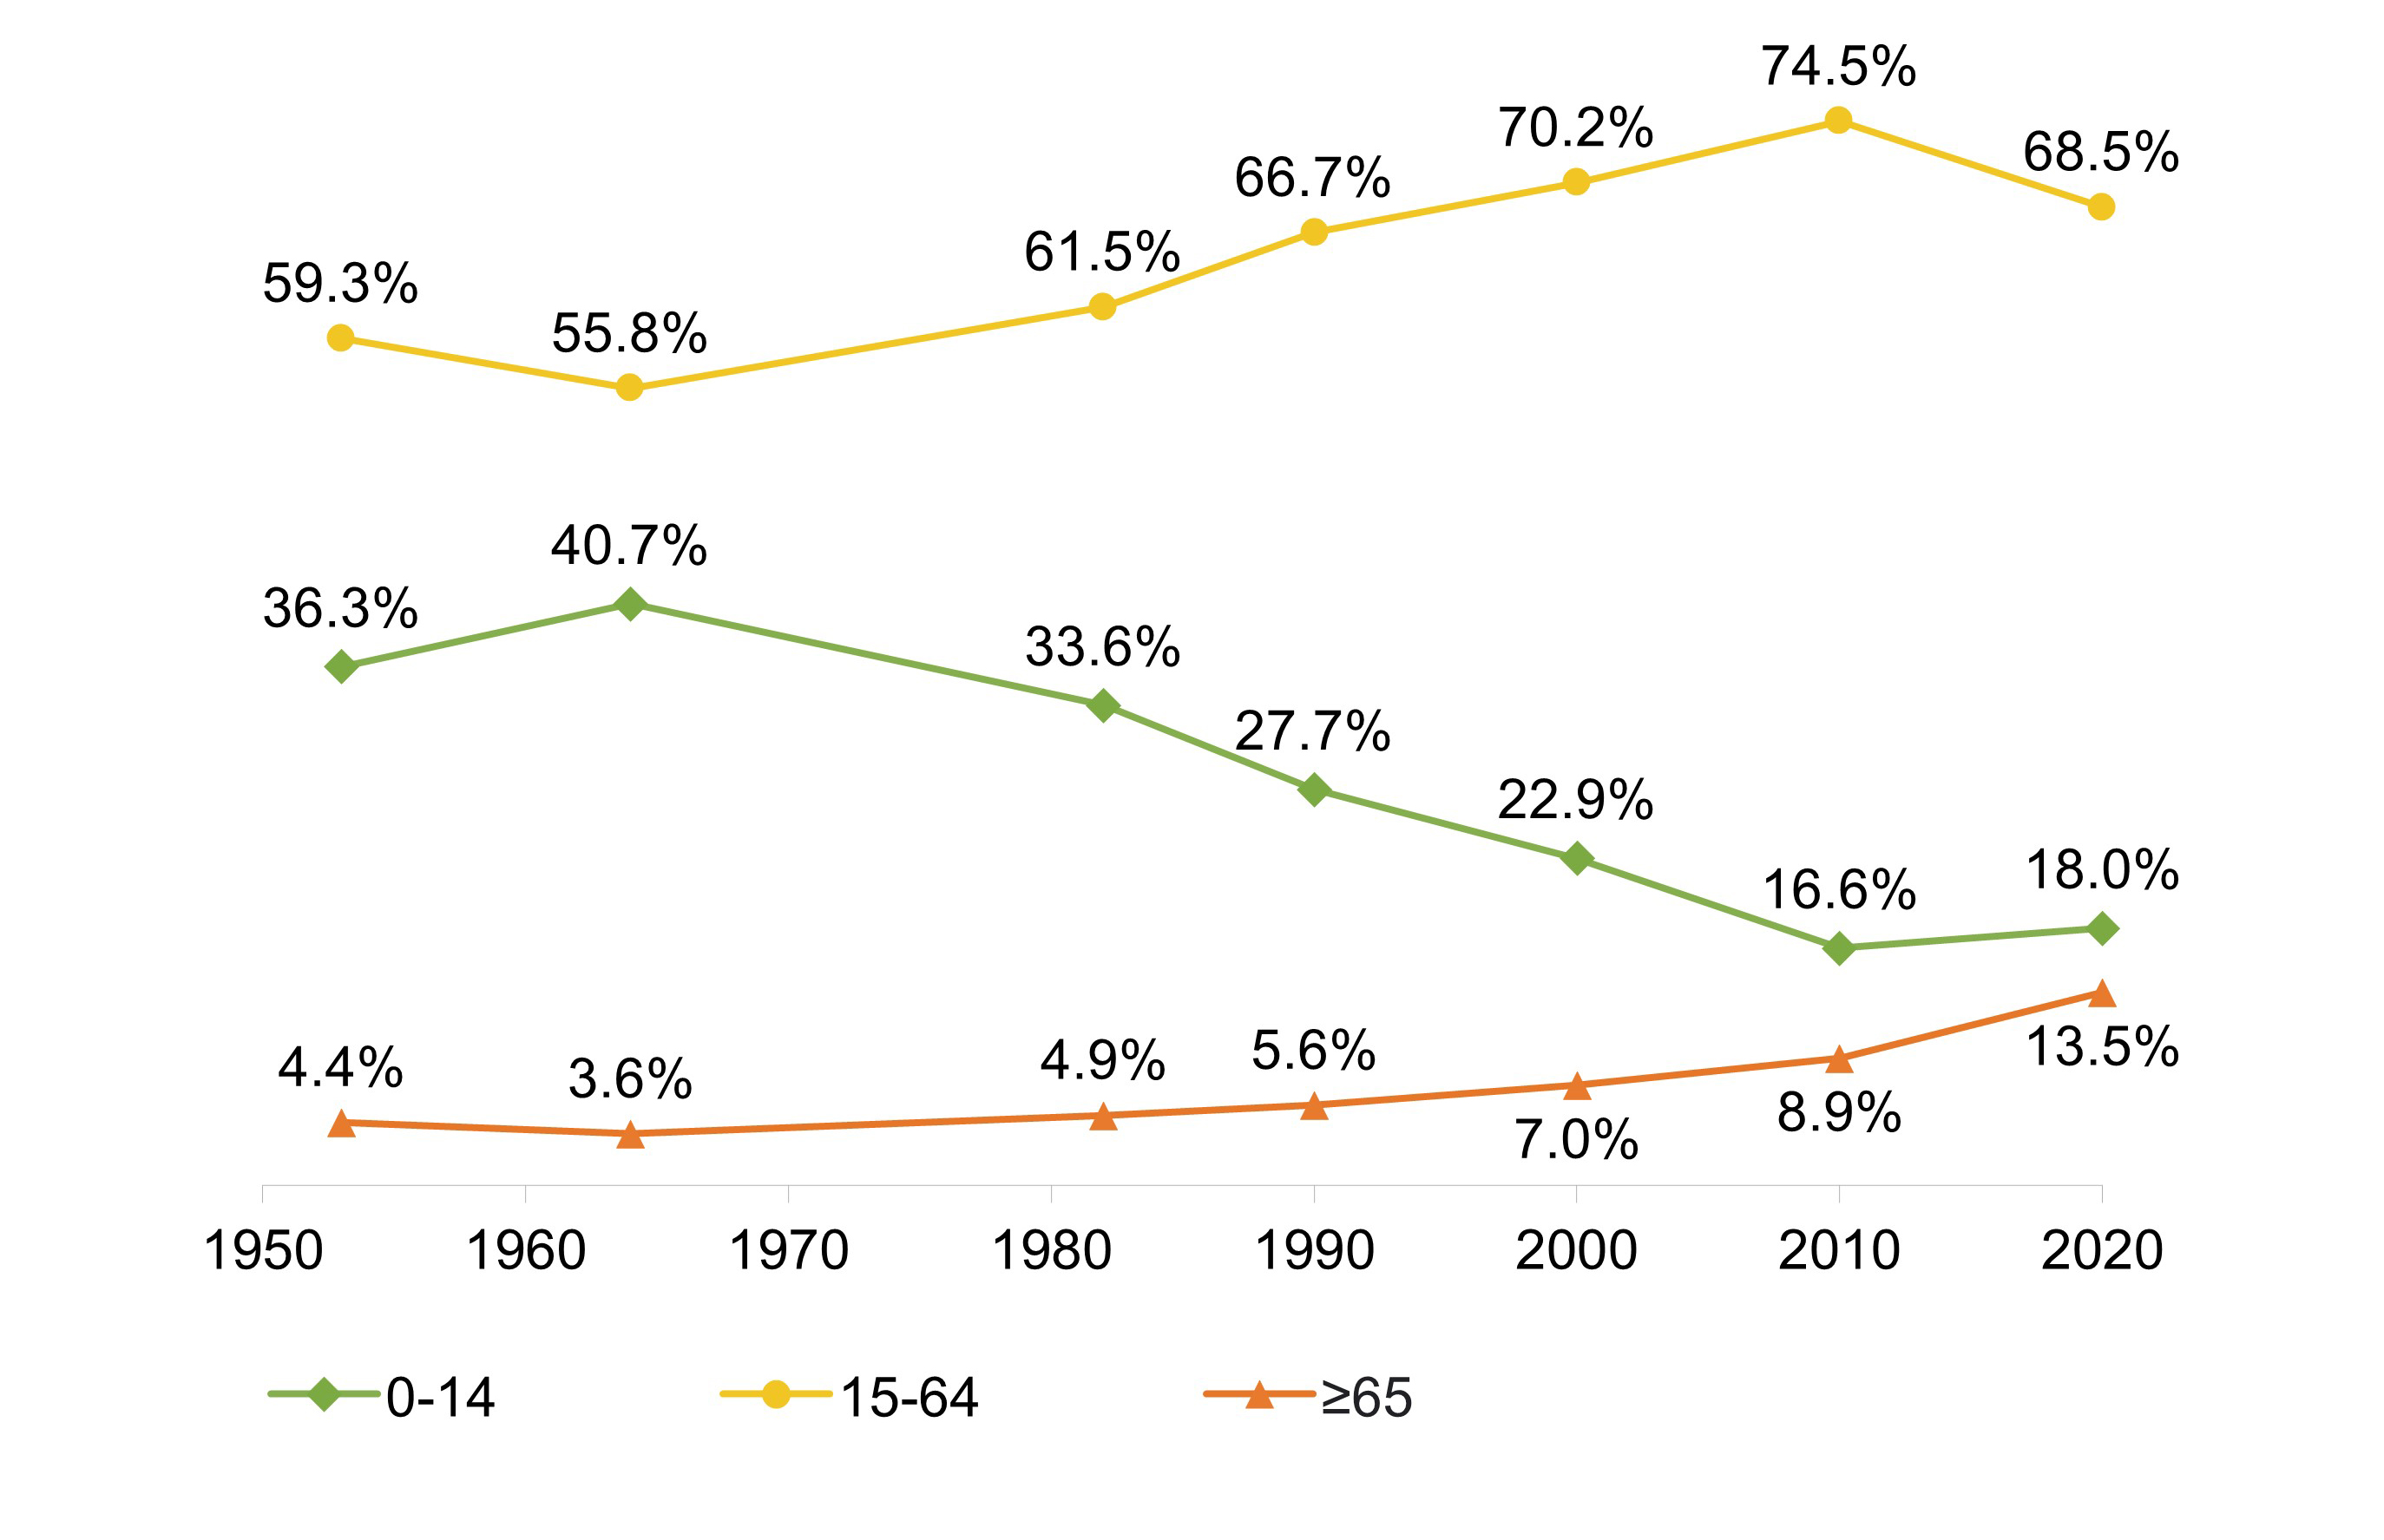 Proportion of different age groups in the total population over the years